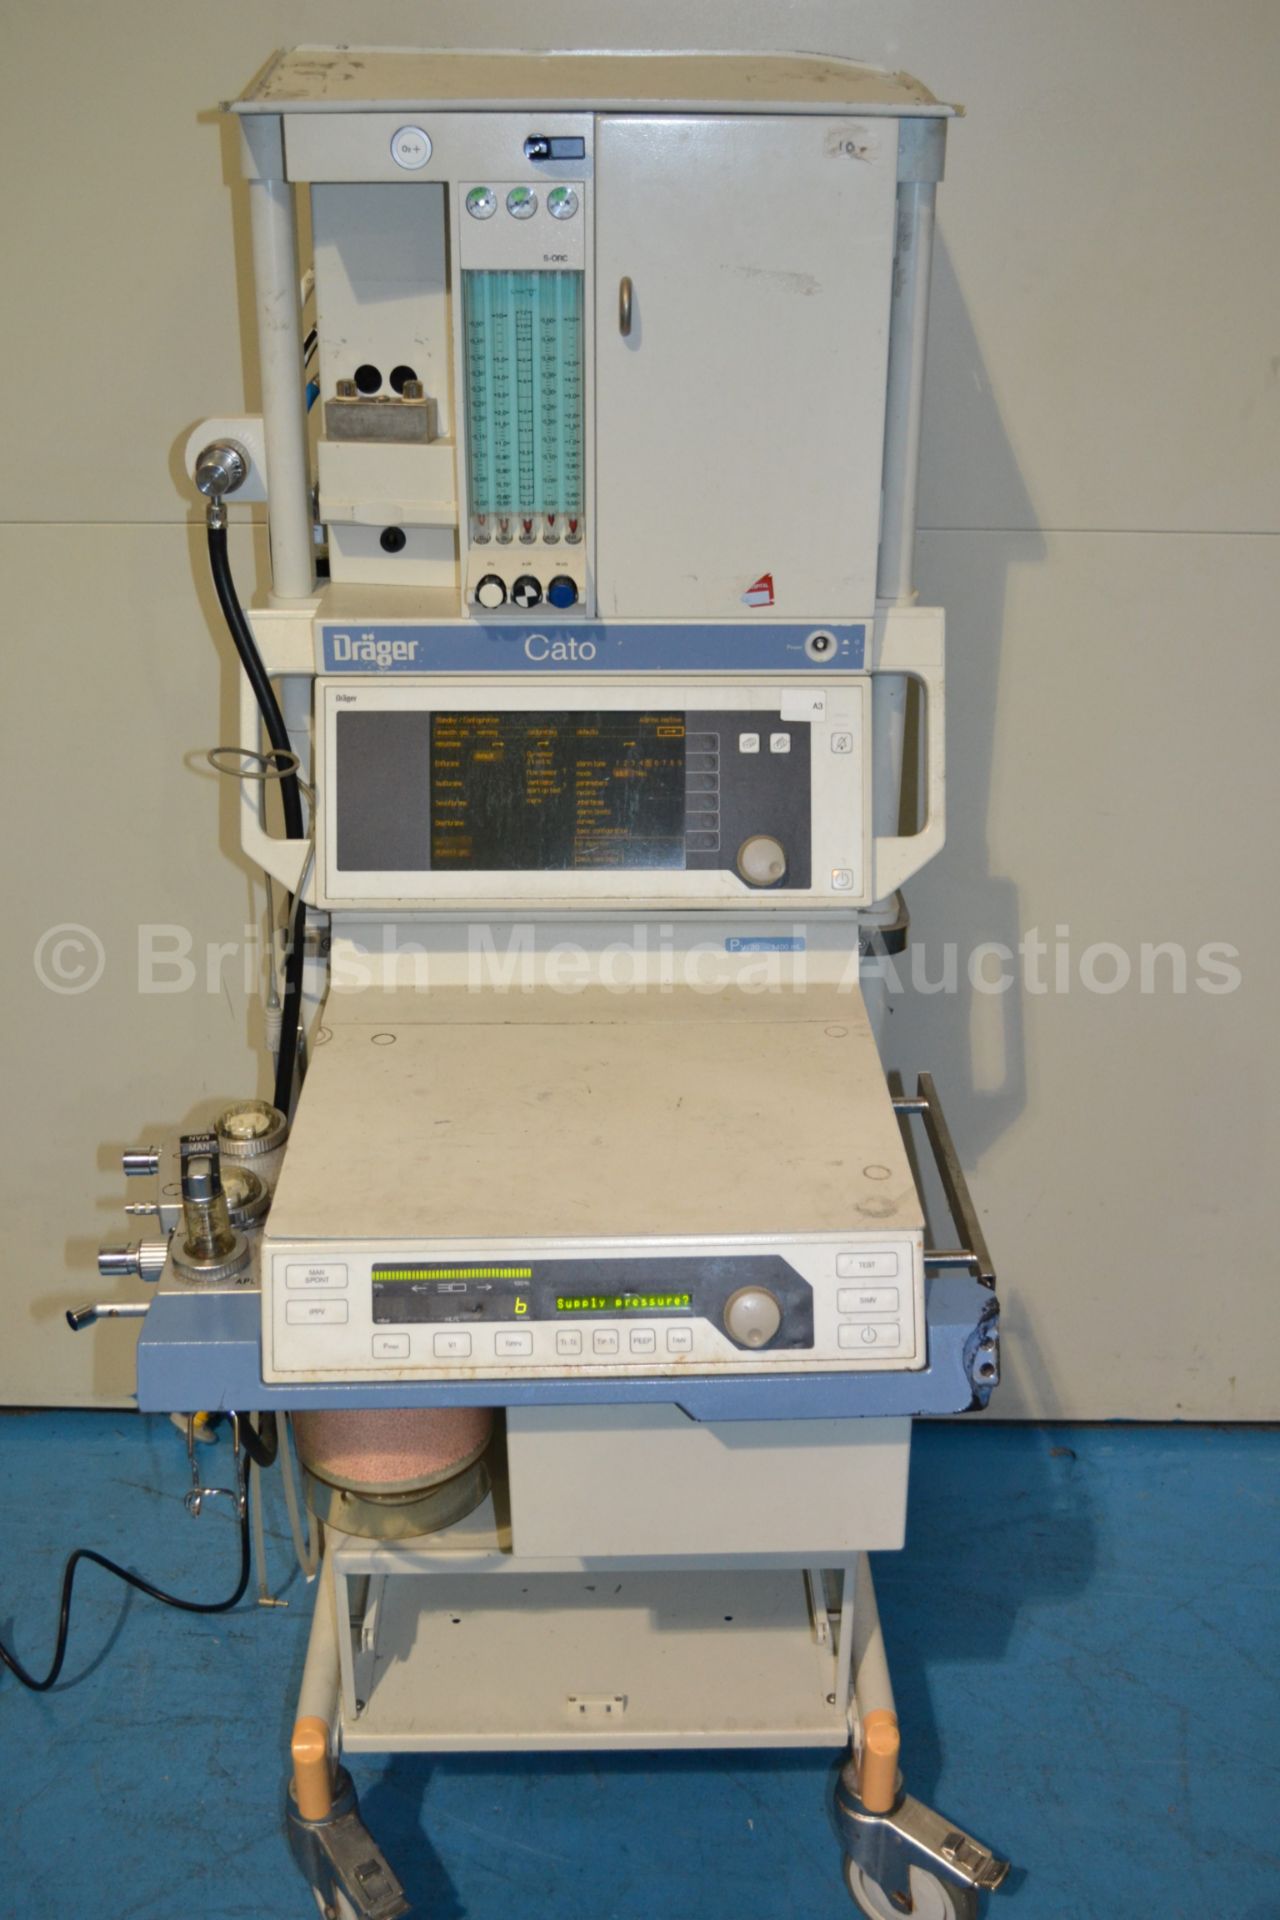 Drager Cato Anaesthesia Machine with Absorber and - Image 3 of 4